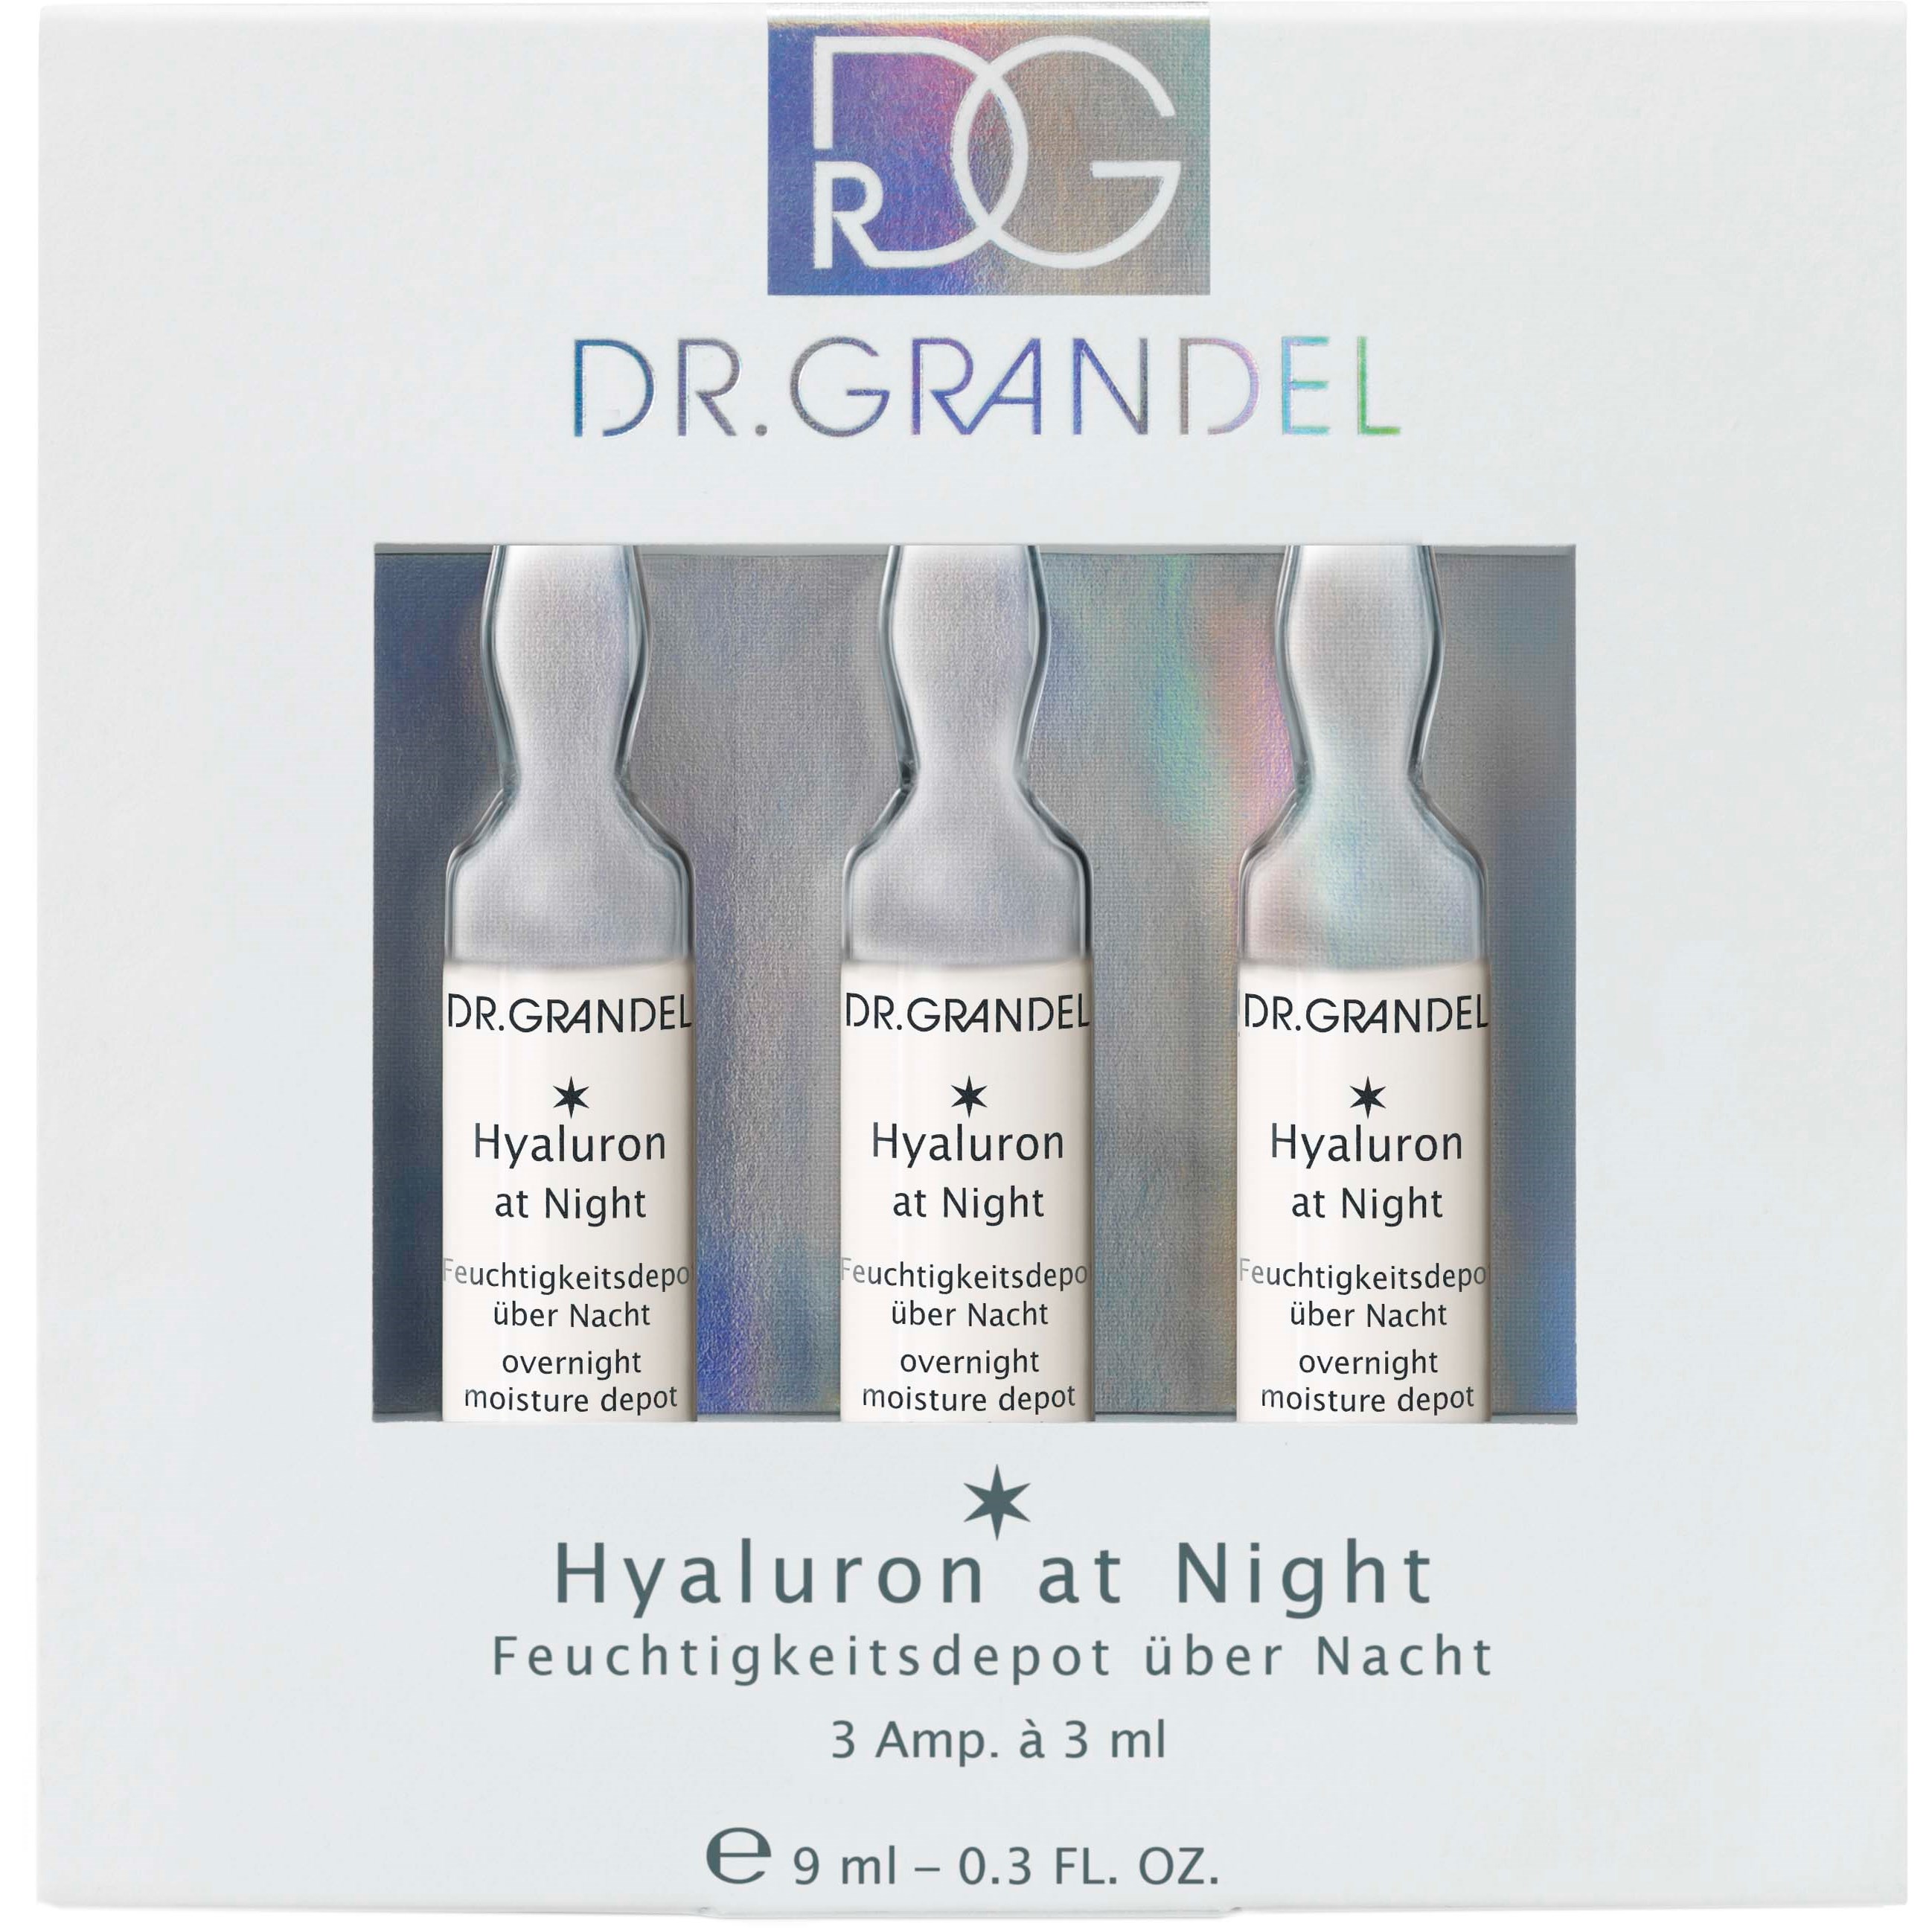 Dr. Grandel Ampoules Concentrates Hyaluron at Night Moisturizing